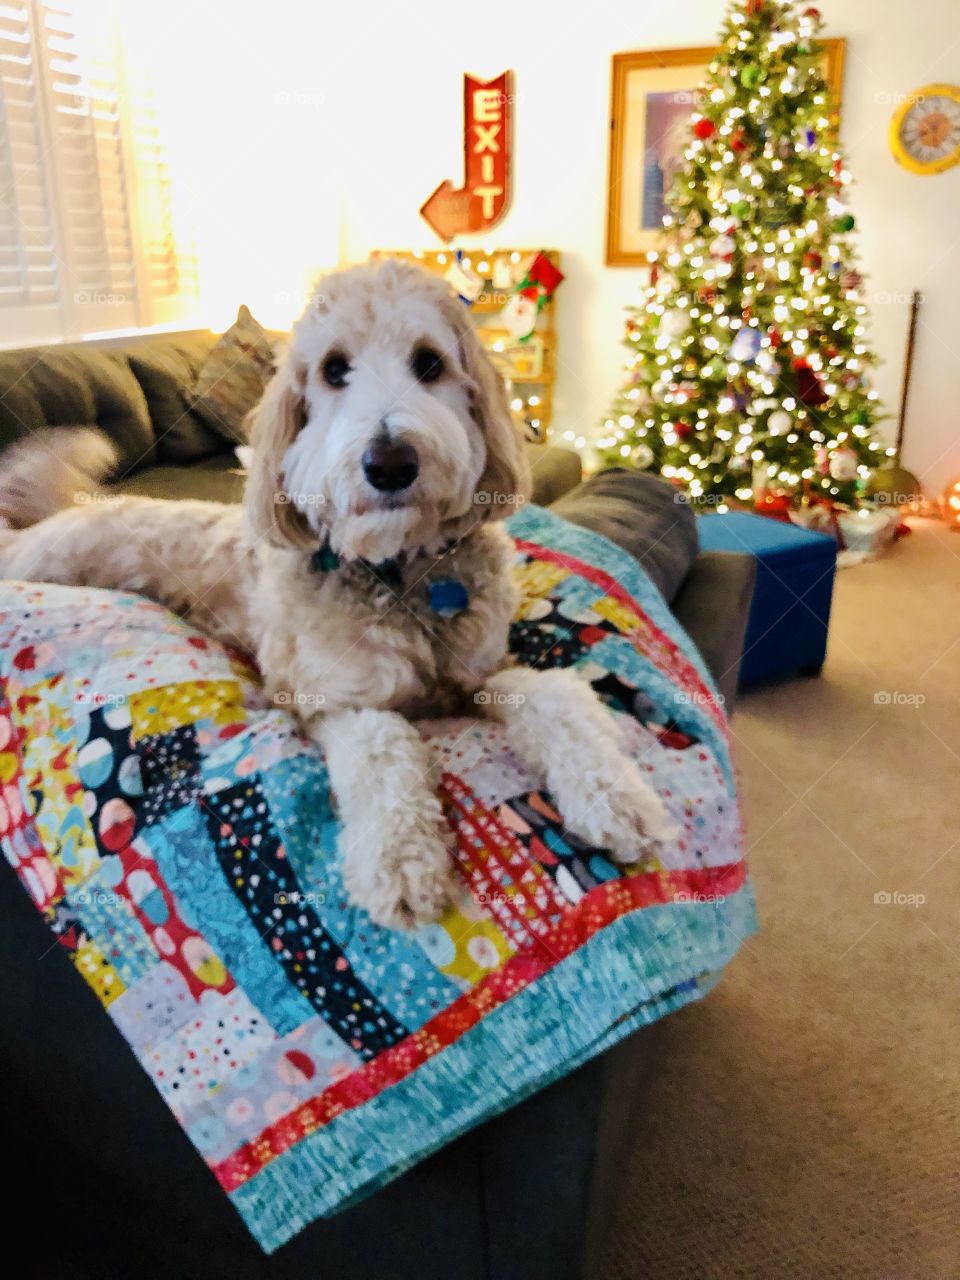 Labradoodle at christmas time!